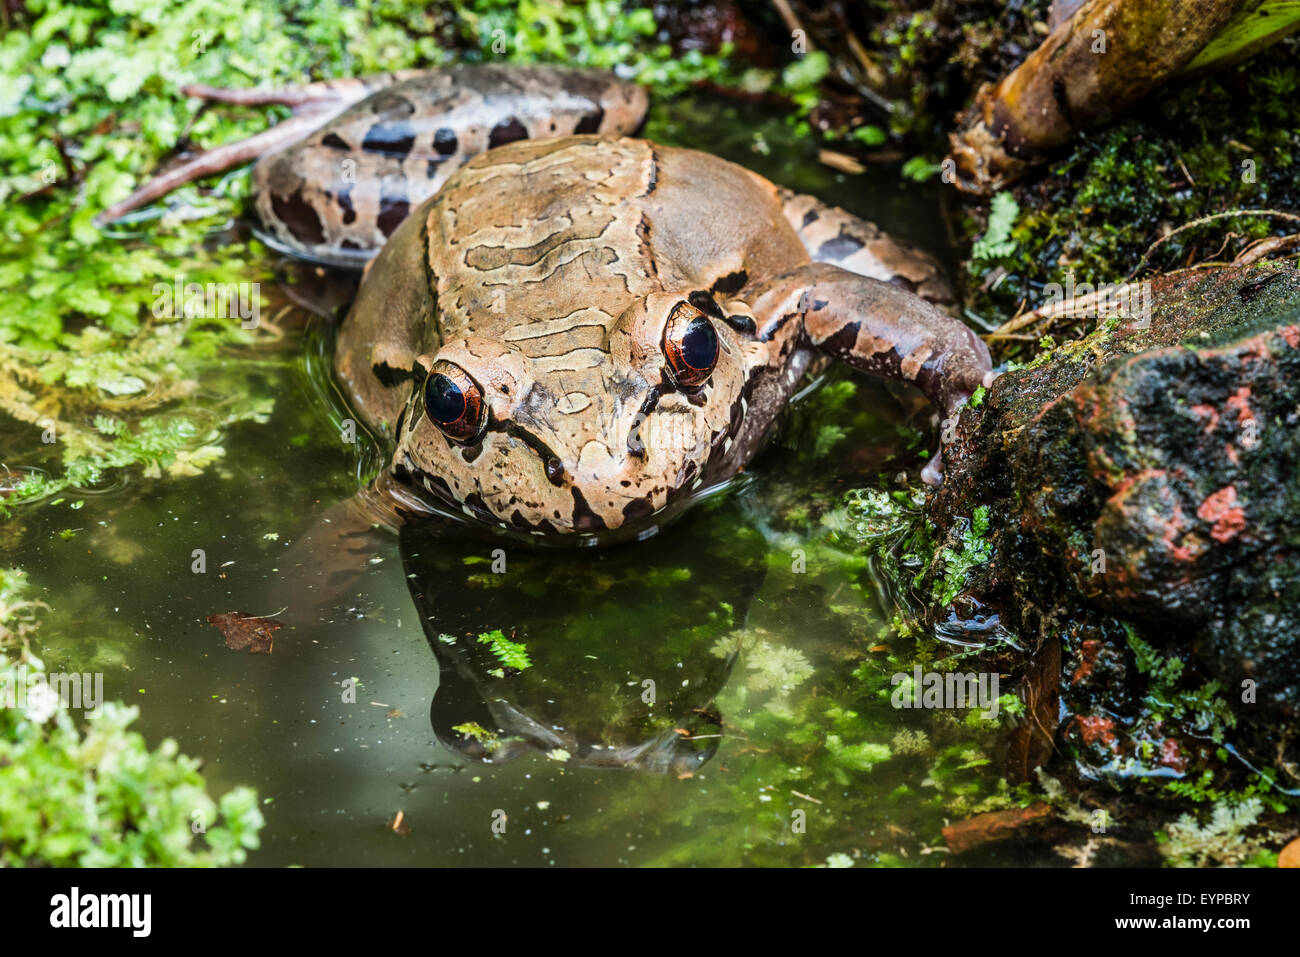 A Central American Bullfrog crawling out of a pond. Stock Photo